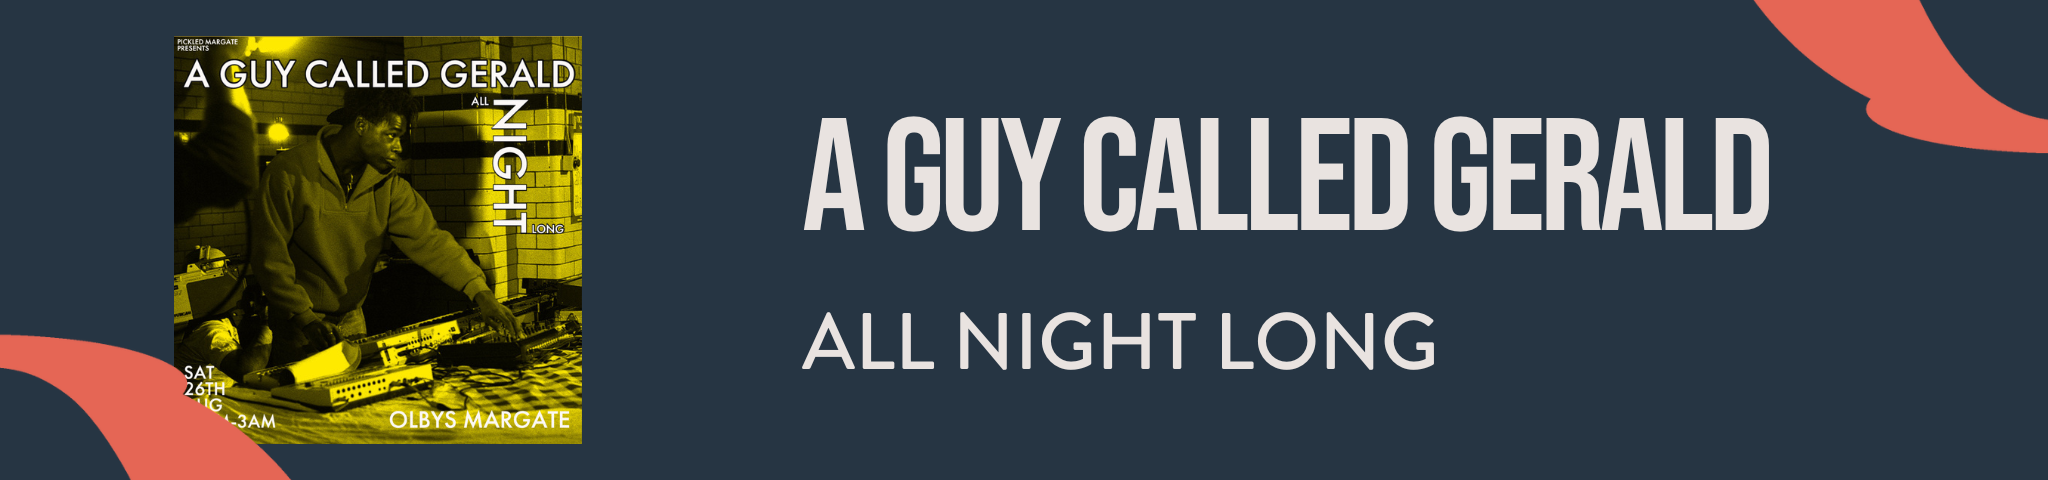 A GUY CALLED GERALD – ALL NIGHT LONG